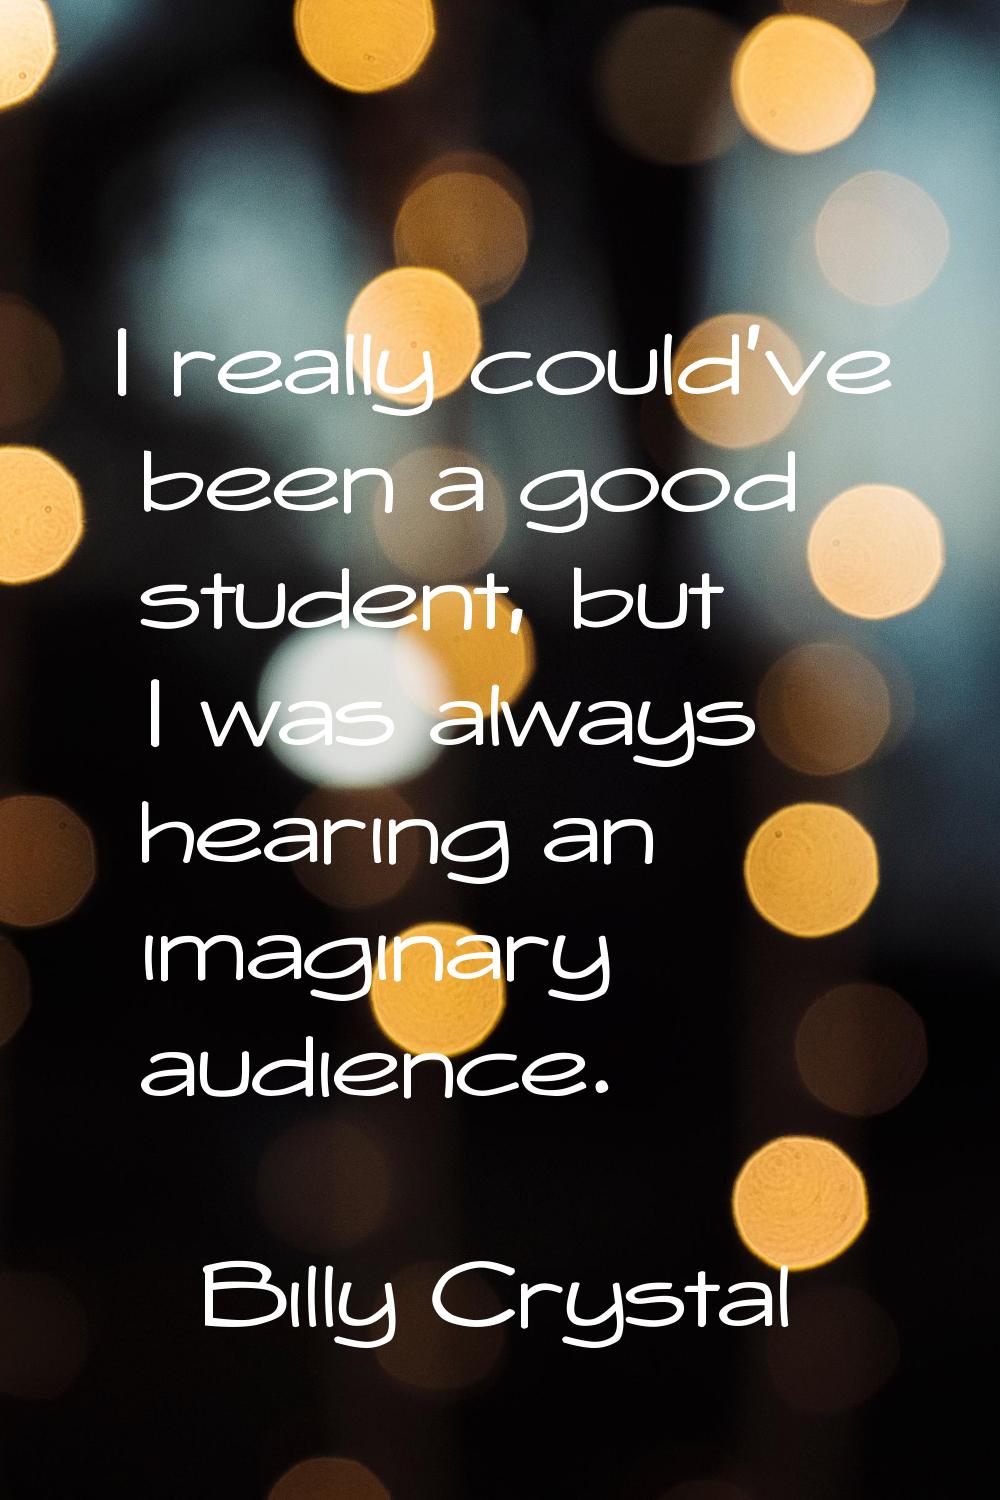 I really could've been a good student, but I was always hearing an imaginary audience.